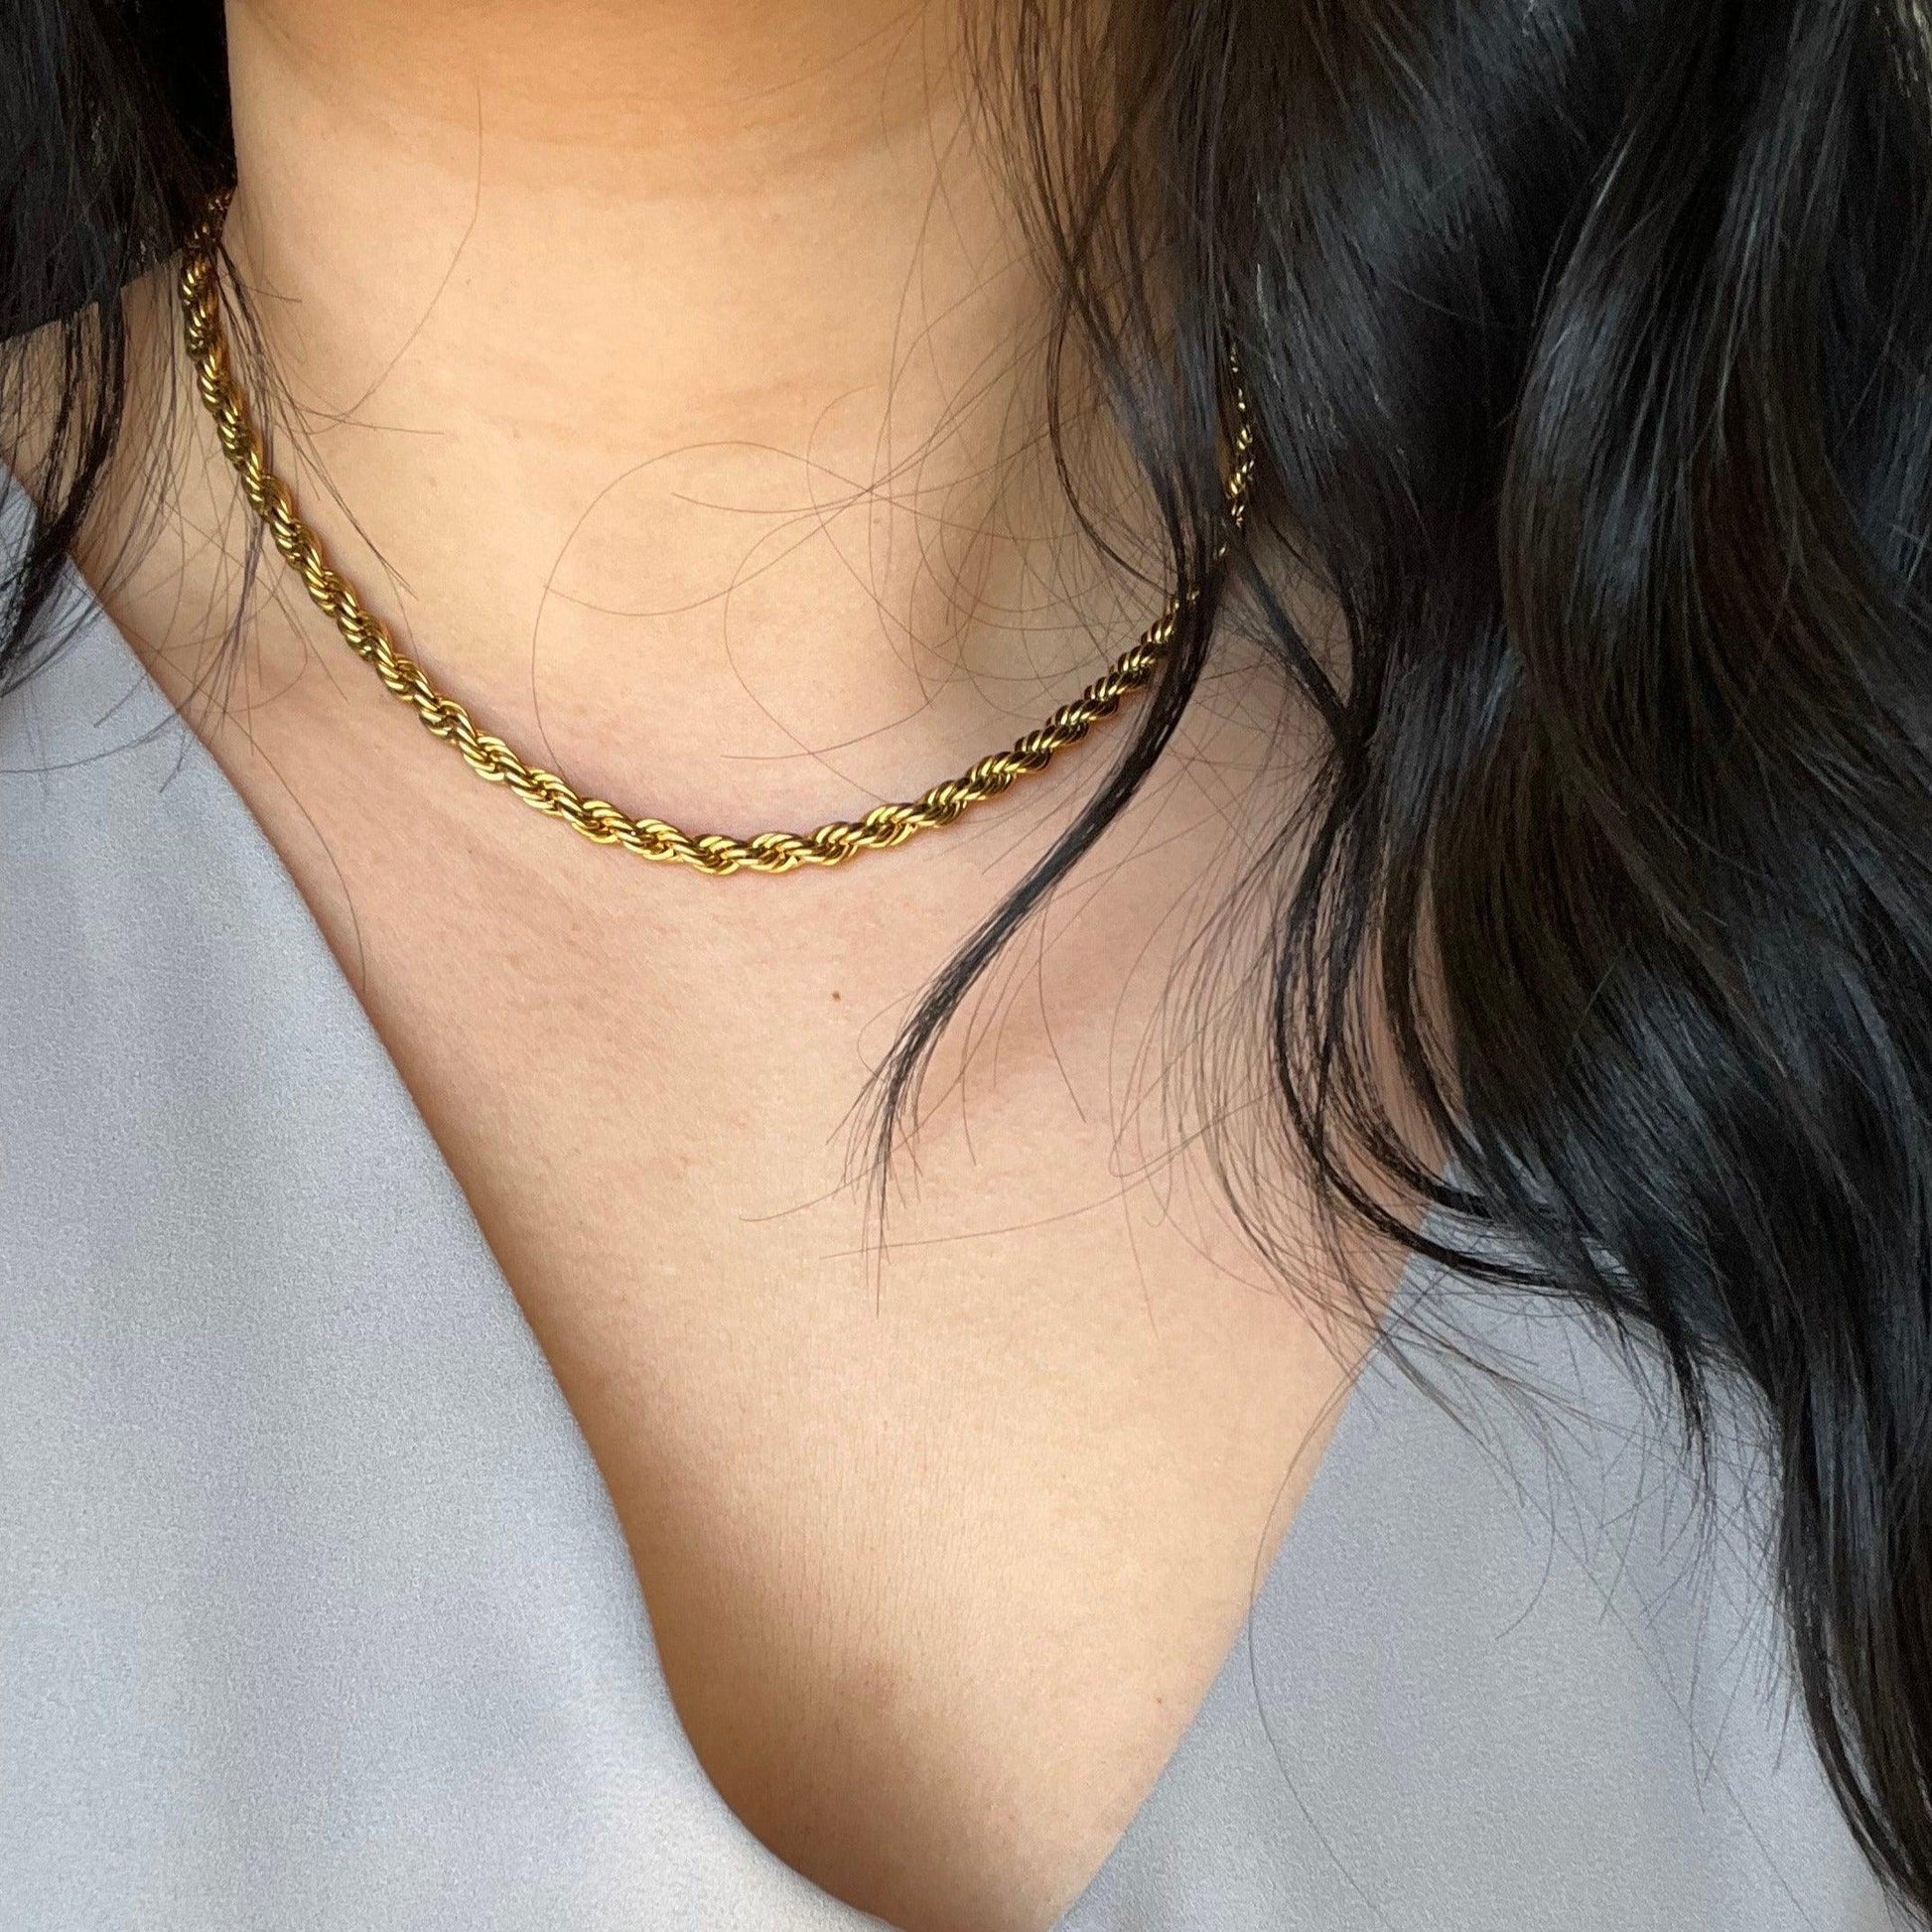 Rope Chain - JESSA JEWELRY | GOLD JEWELRY; dainty, affordable gold everyday jewelry. Tarnish free, water-resistant, hypoallergenic. Jewelry for everyday wear